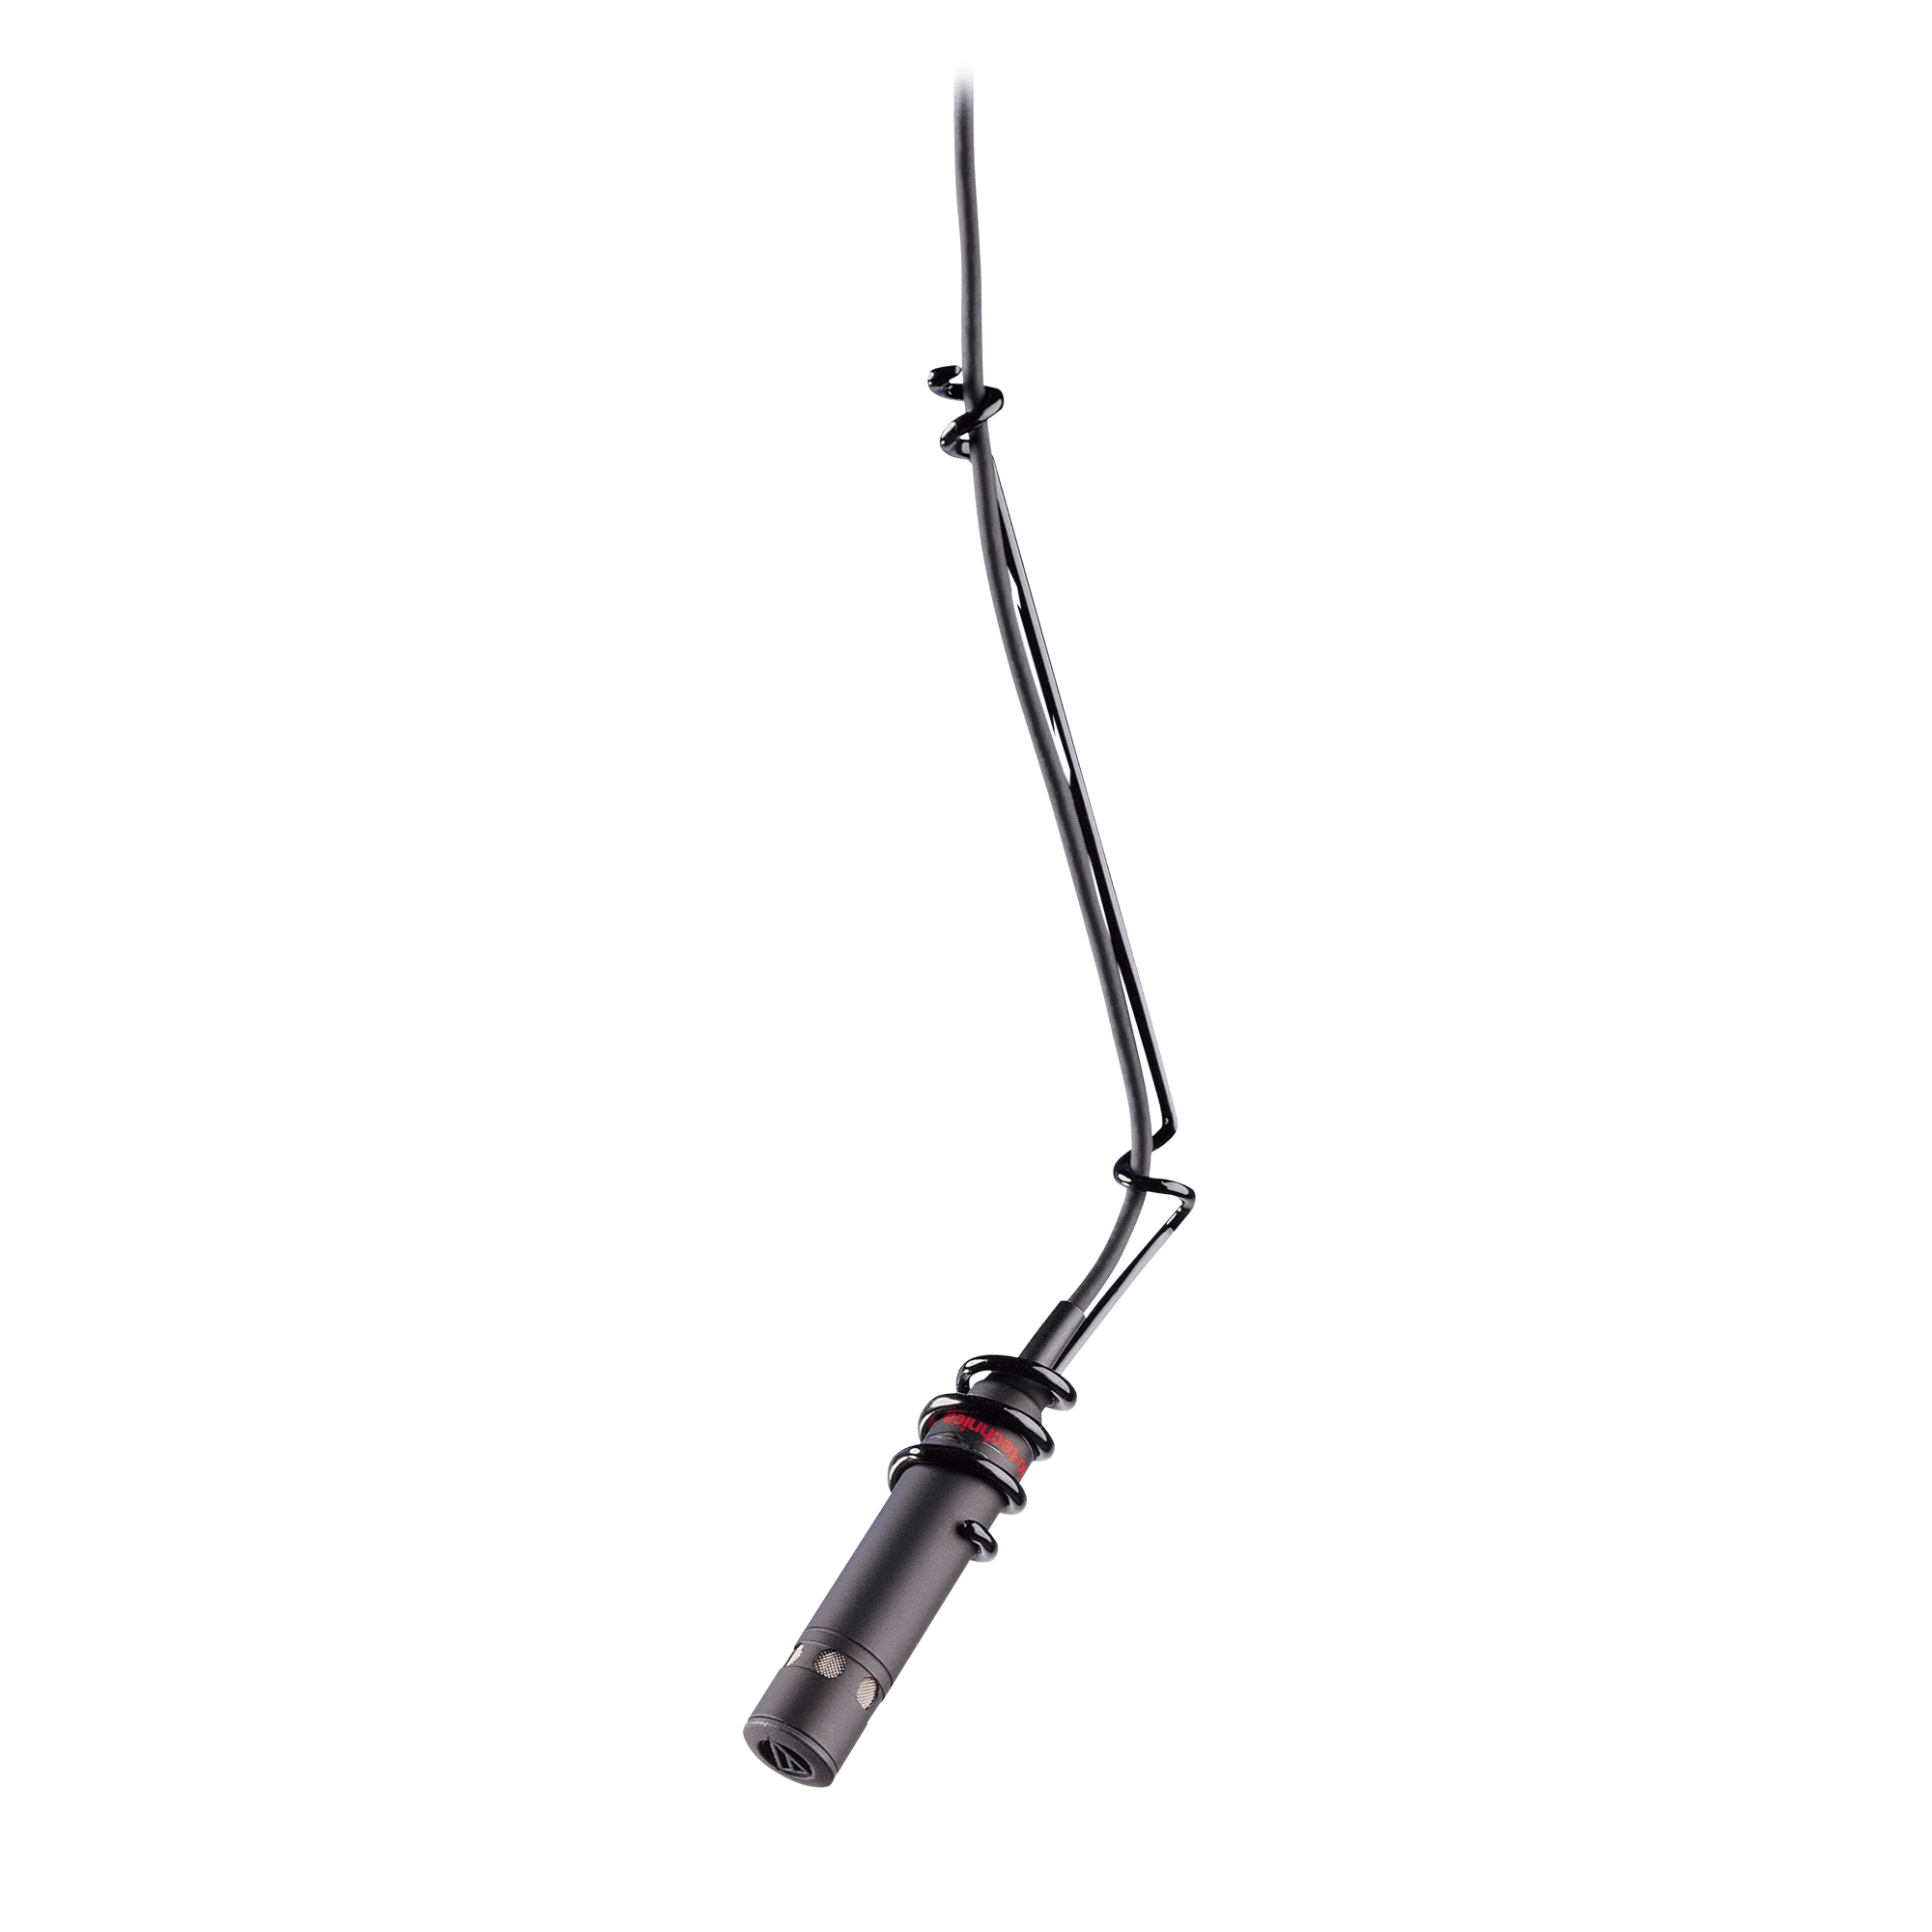 Condenser　PRO45　Microphone　ProPoint®　Cardioid　Hanging　Audio-Technica